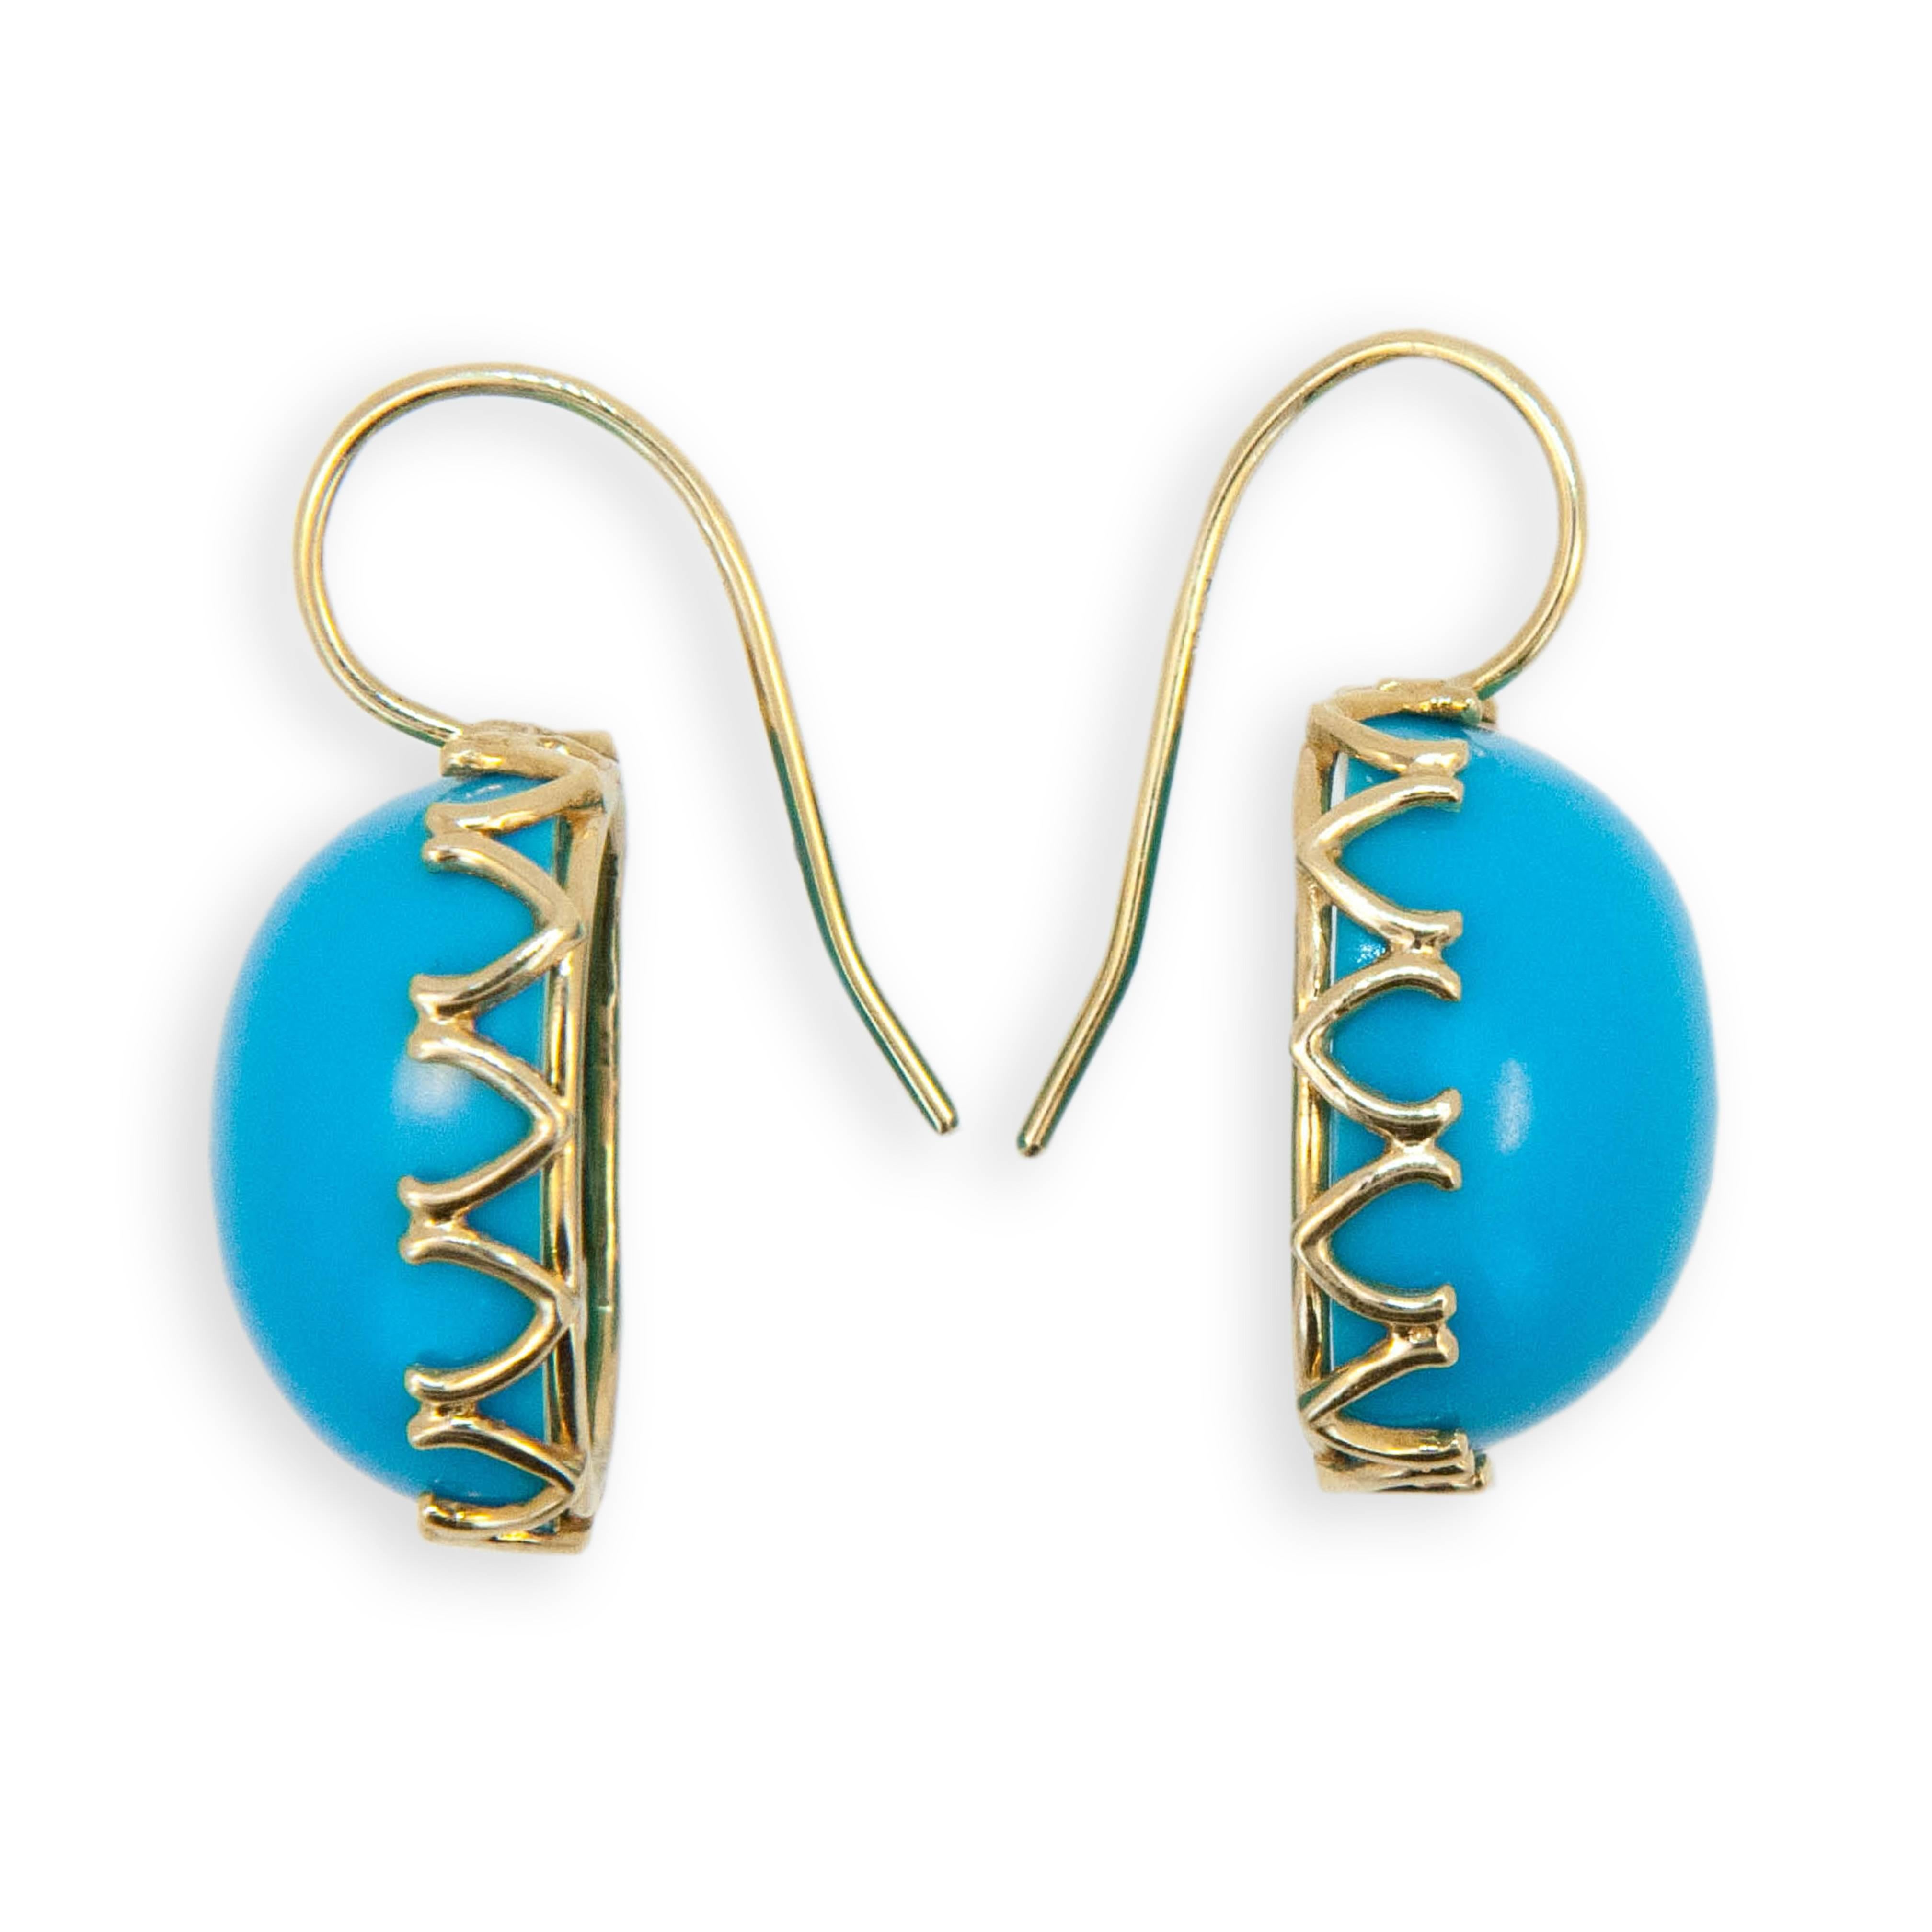 18 karat yellow gold earrings V scalloped bezel, each set with one cushion cabochon 16.5 x 14  mm Turquoise. Wires.